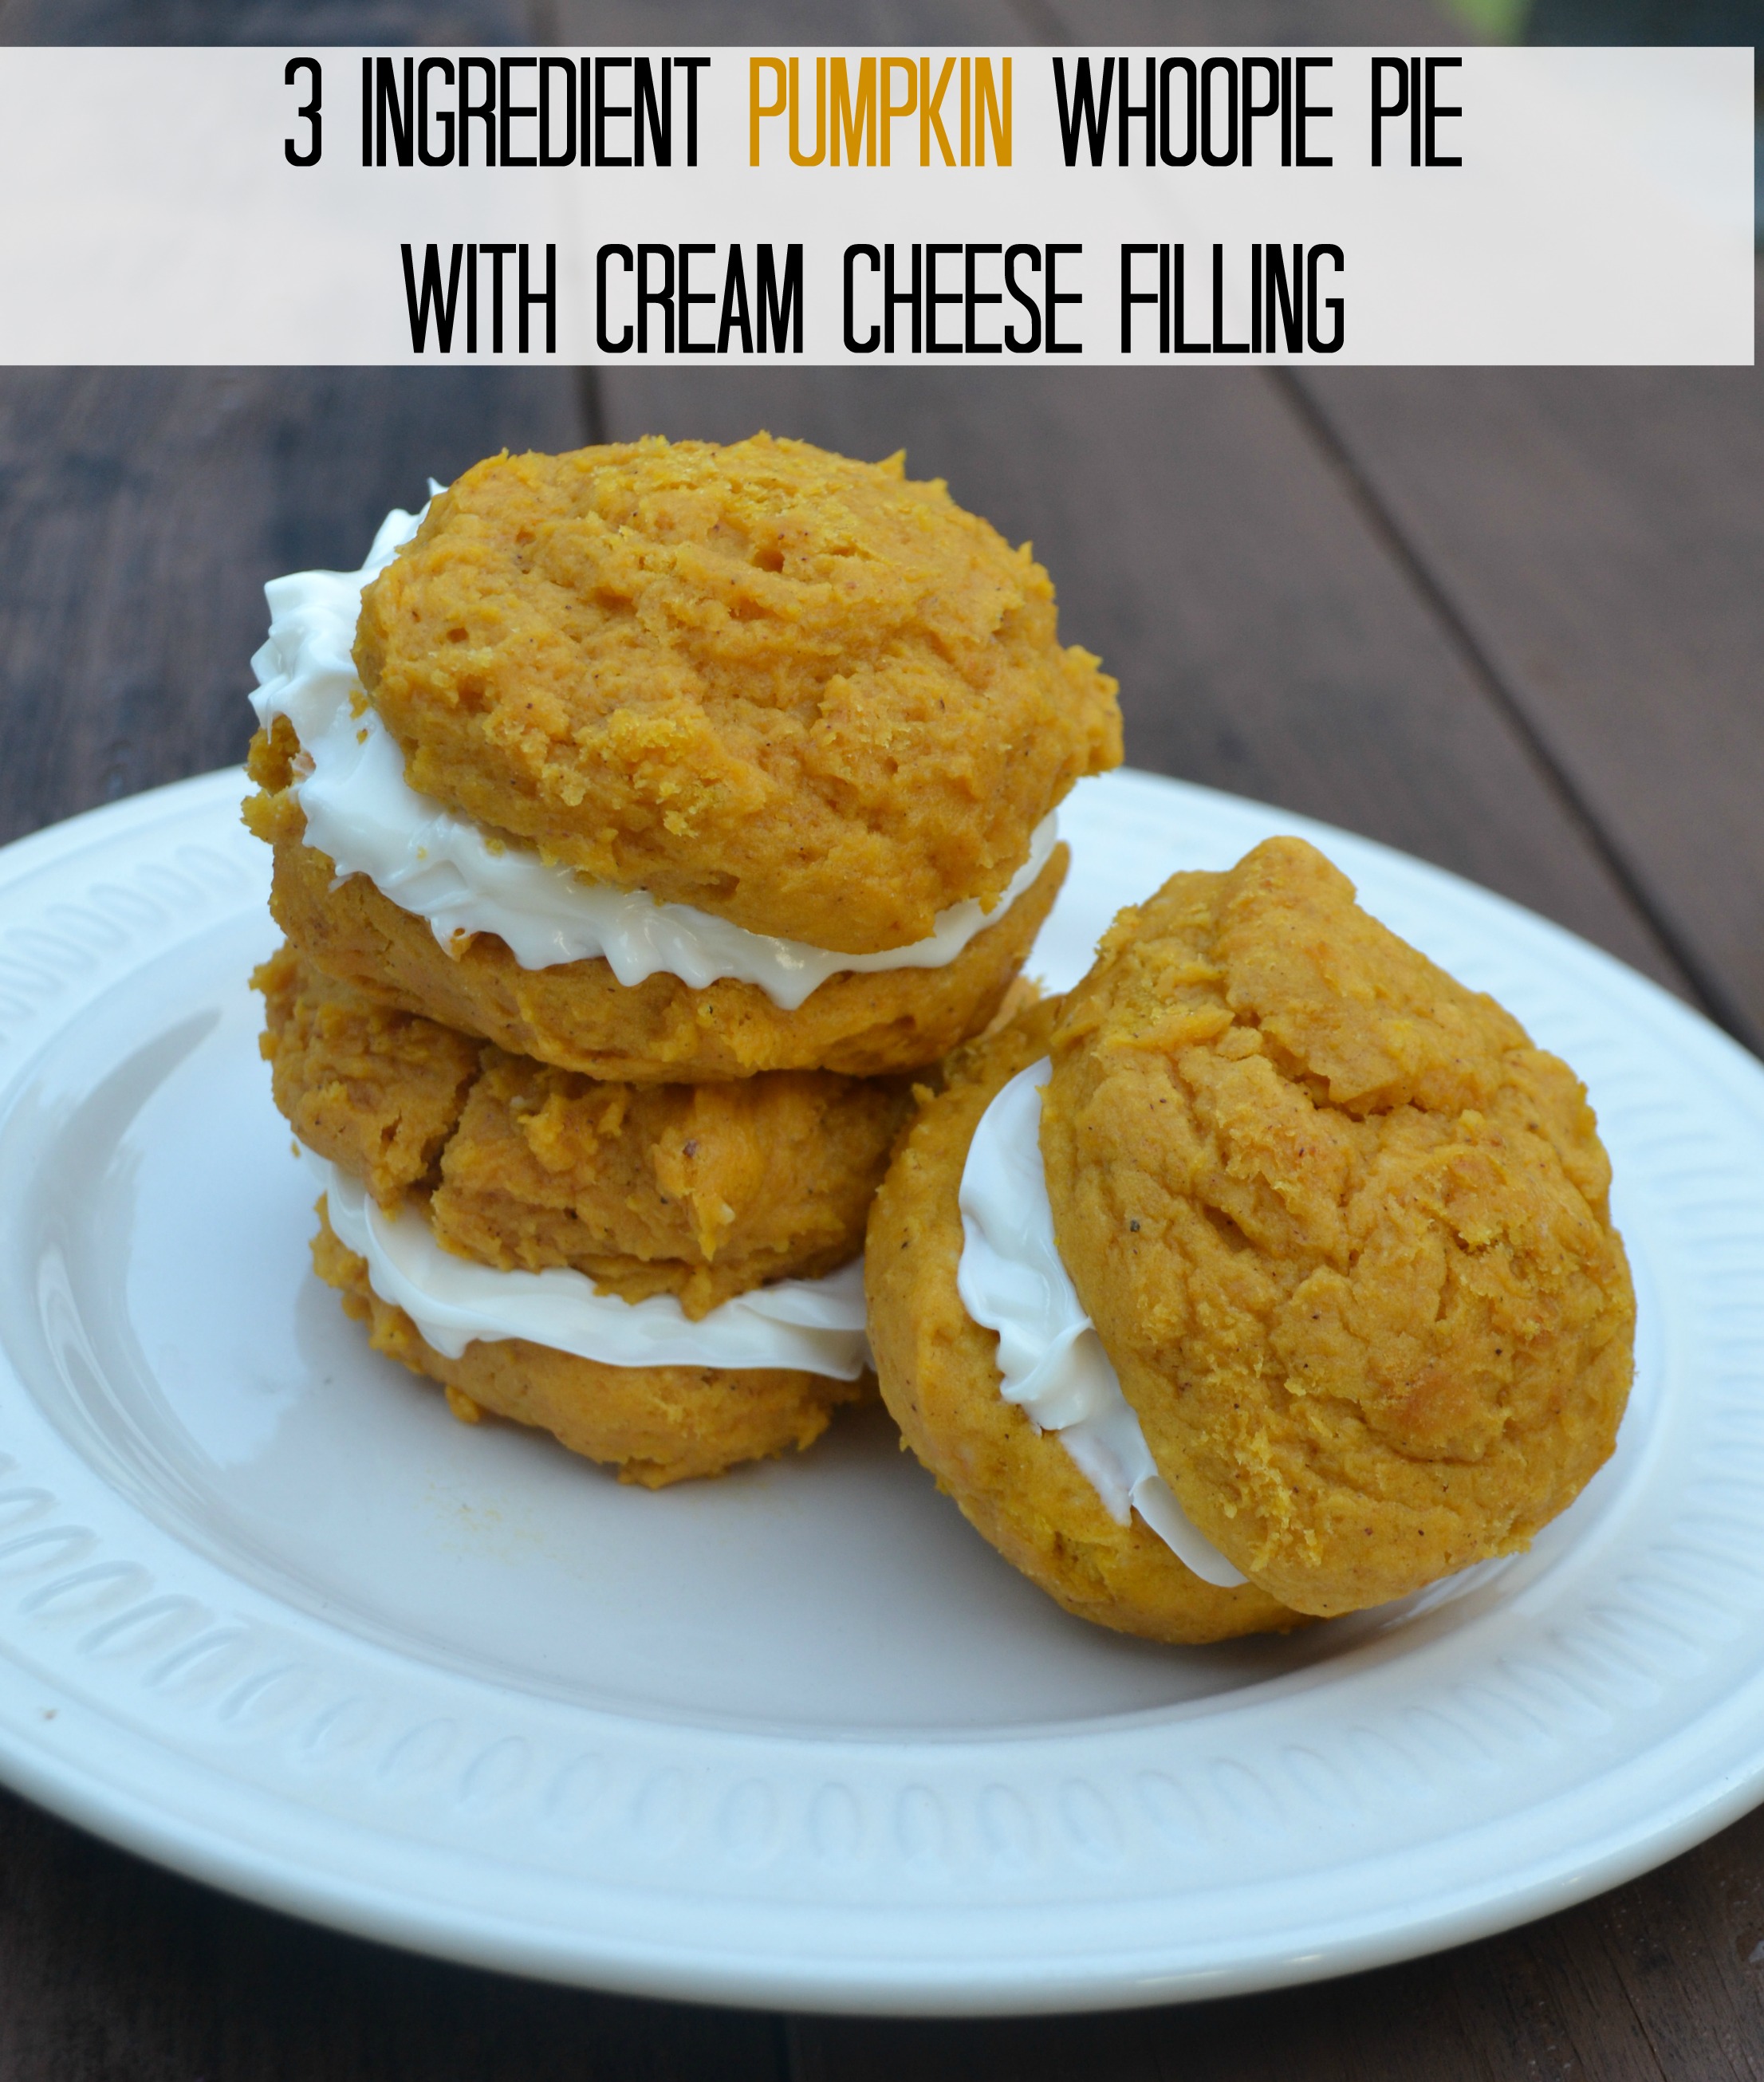 Pumpkin Whoopie Pie with Cream Cheese Filling